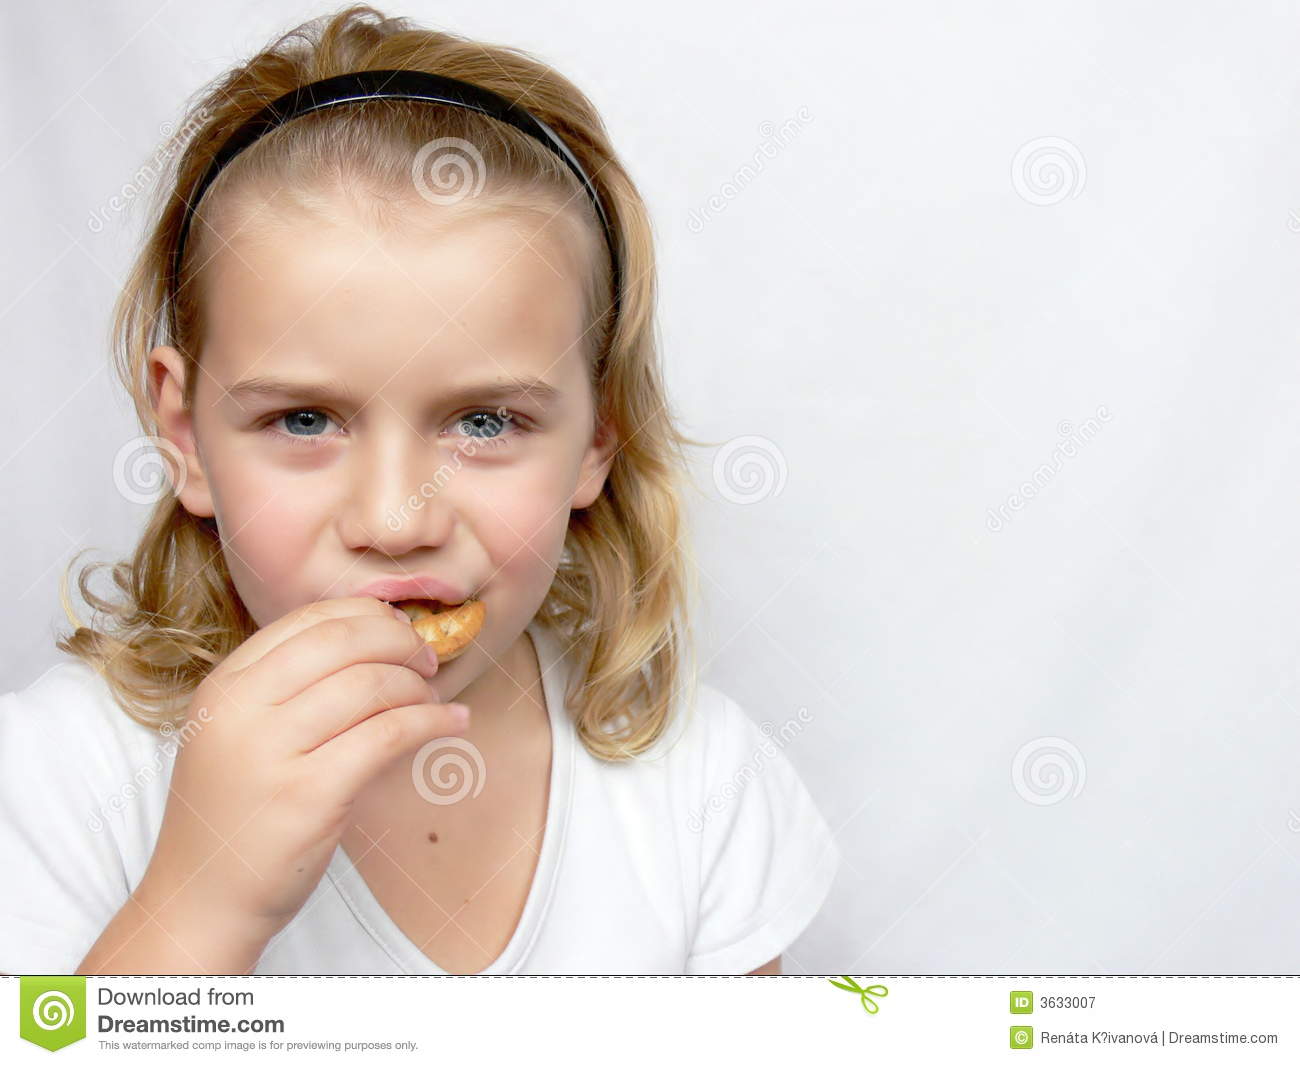 Boy Is Eating Cookies Royalty Free Stock Photography   Image  3633007